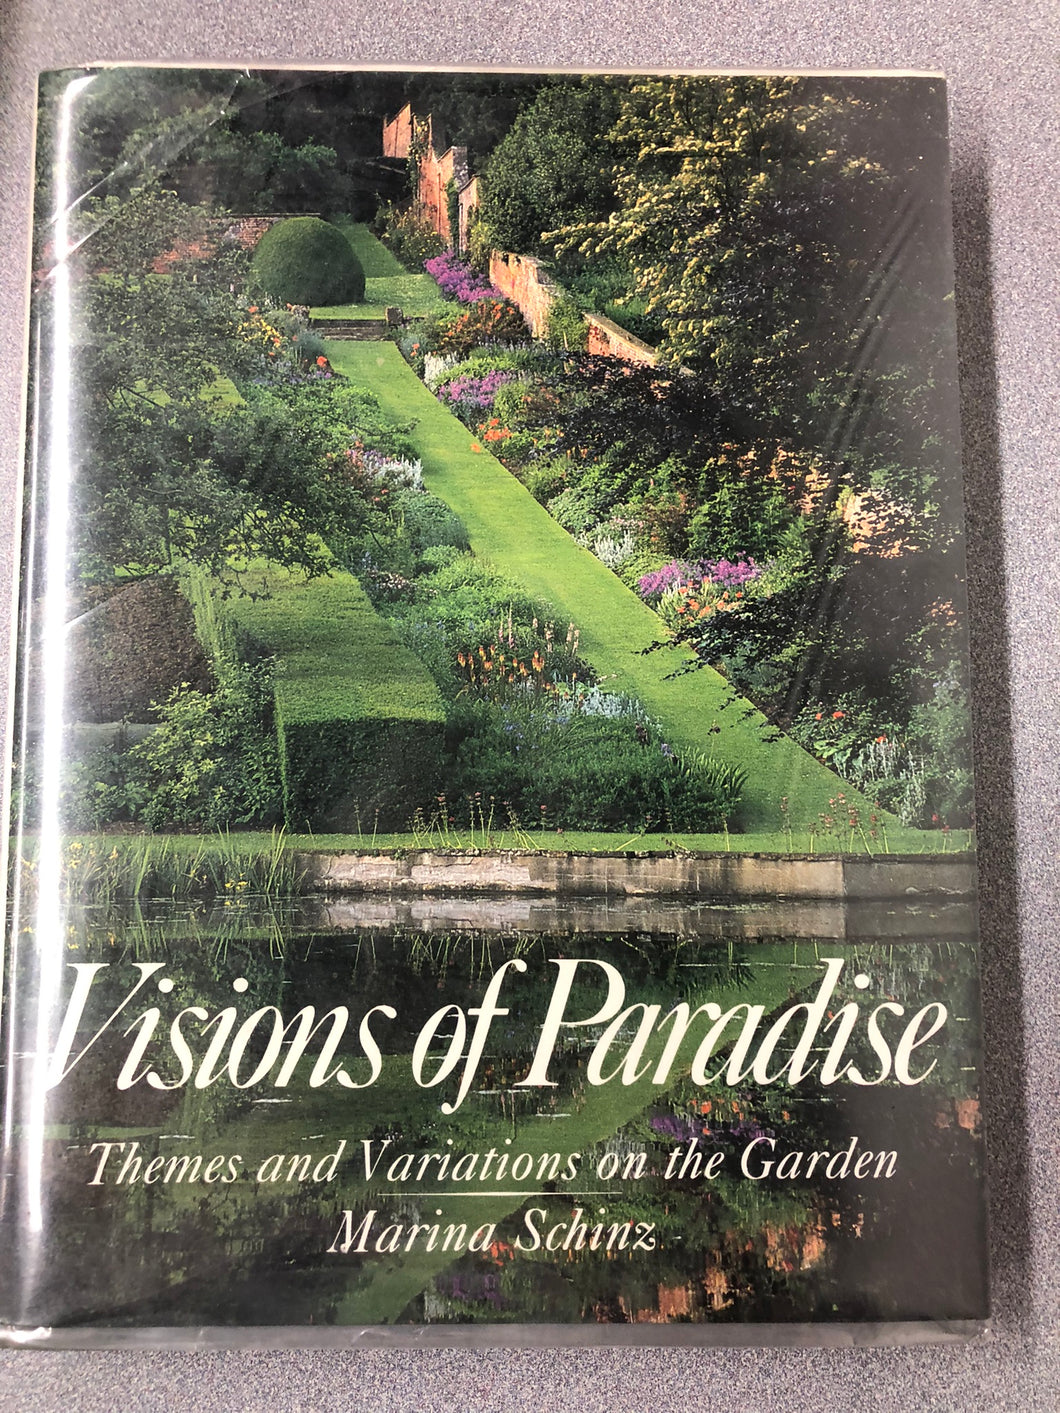 Visions of Paradise: Themes and Variations on the Garden, Schinz, Marina [1985] G 8/22